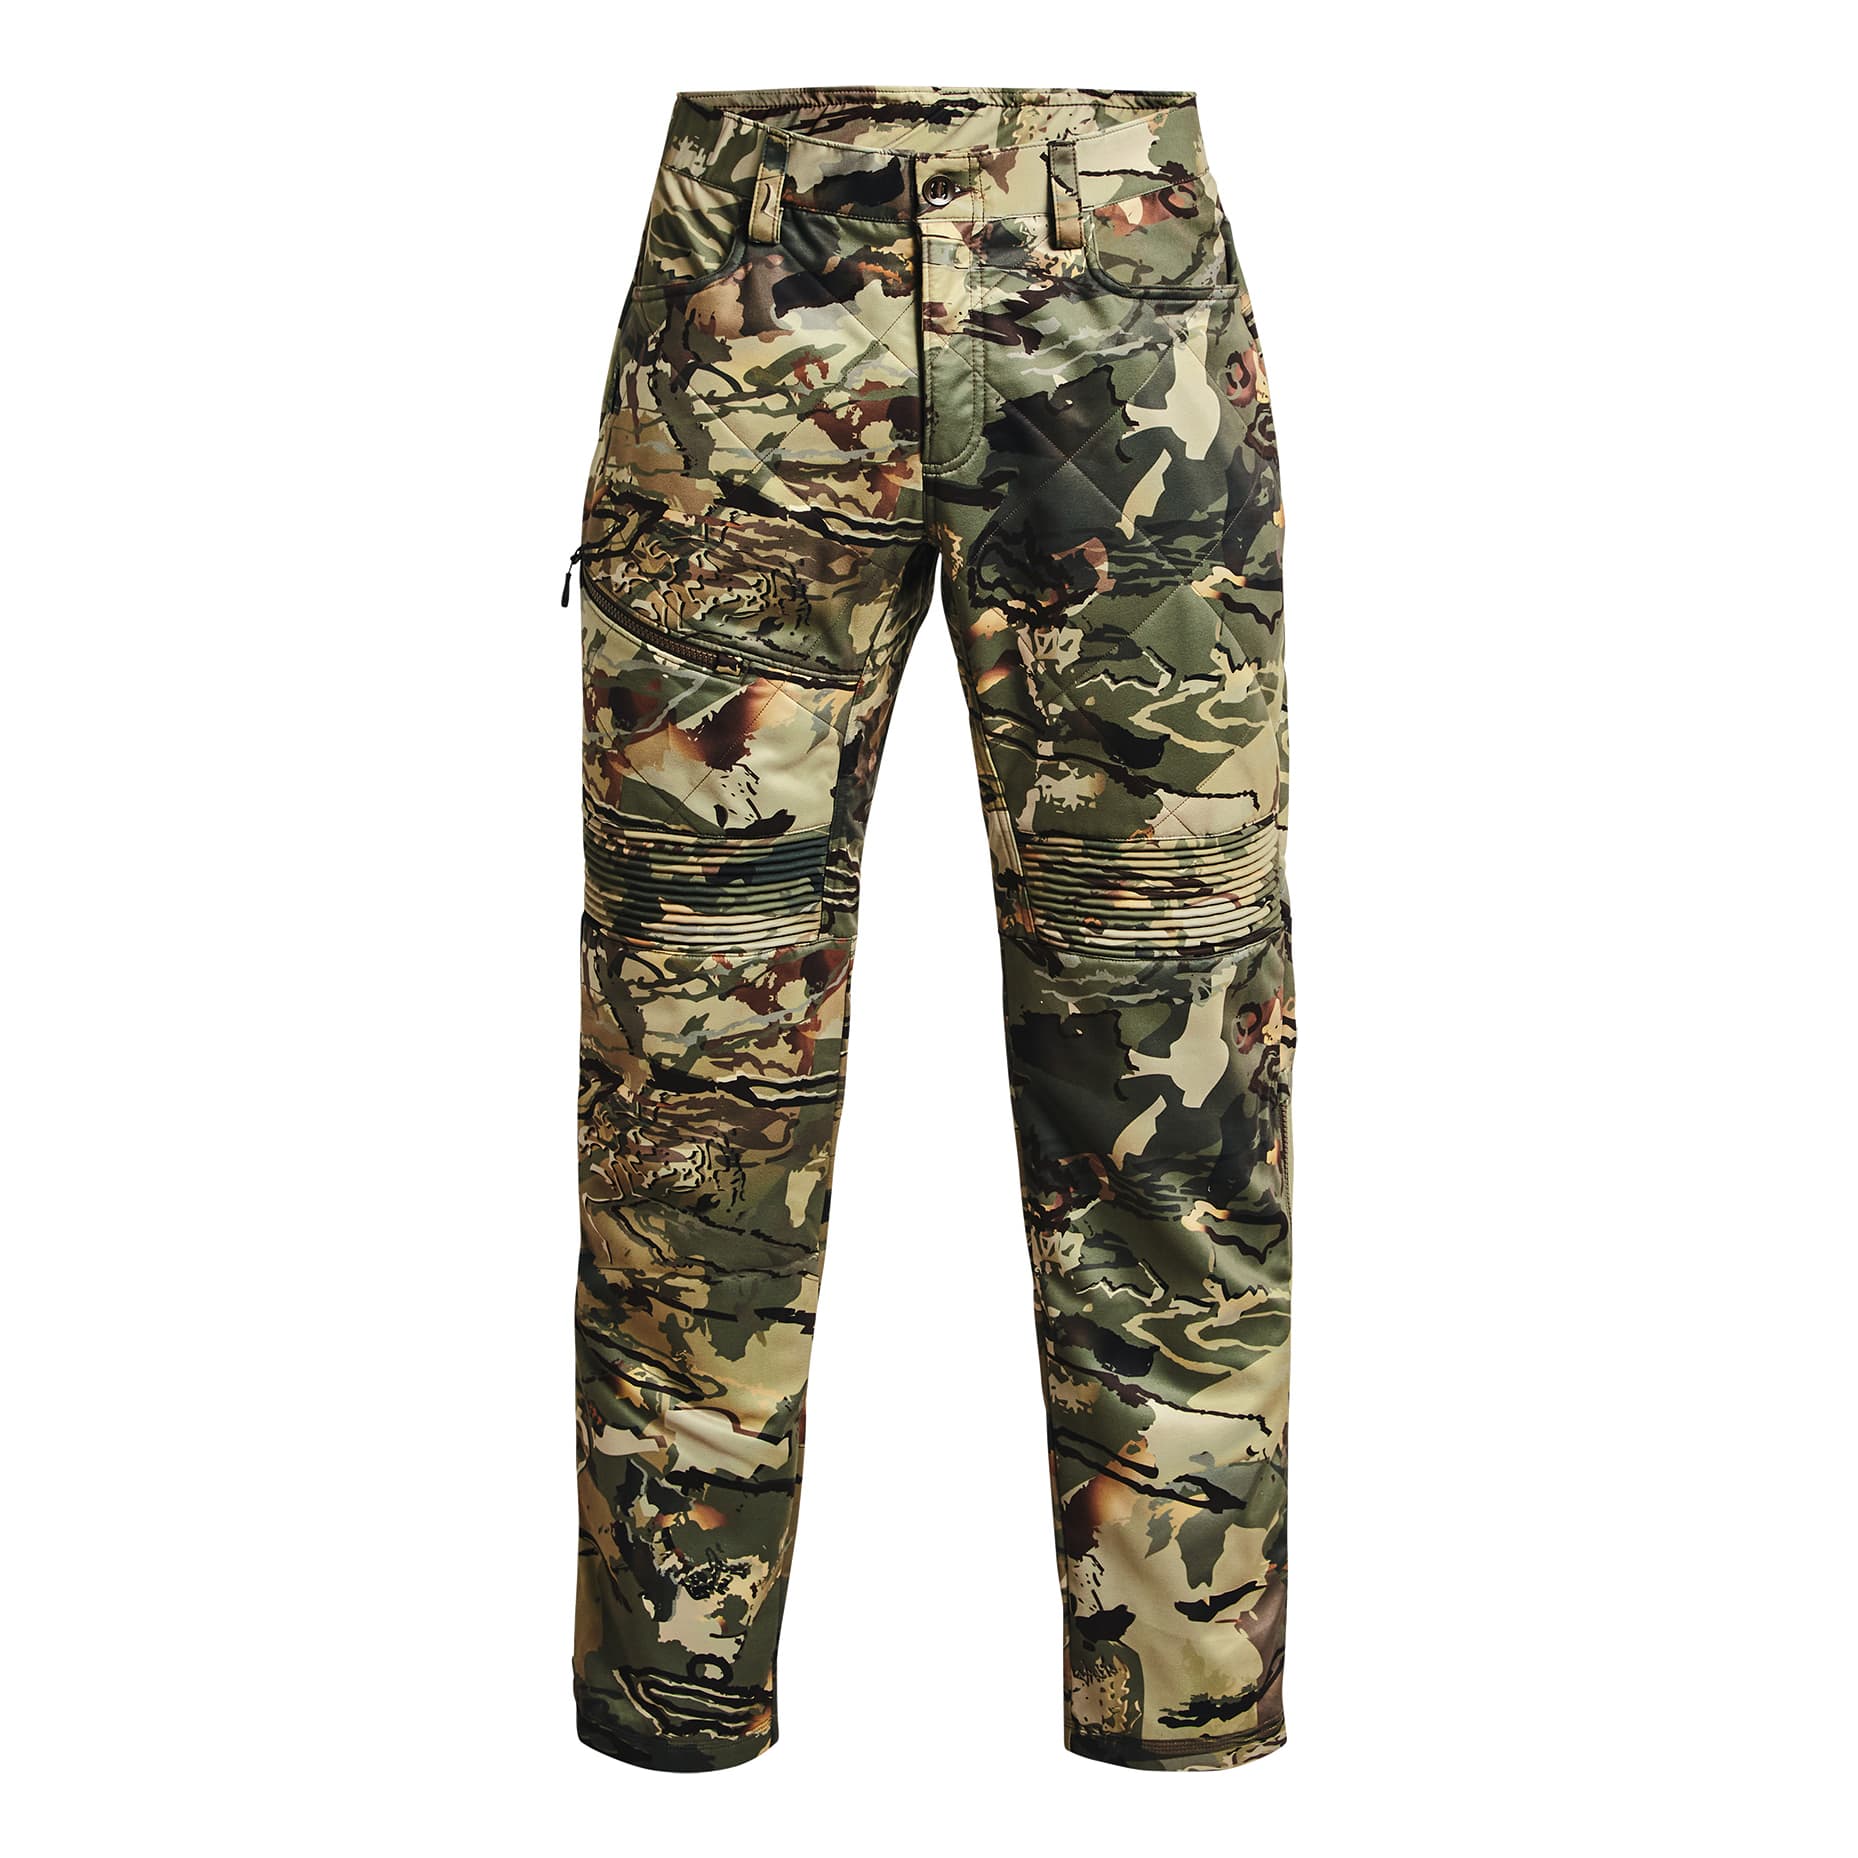 Under Armour® Men's Brow Tine ColdGear® Infrared Pants